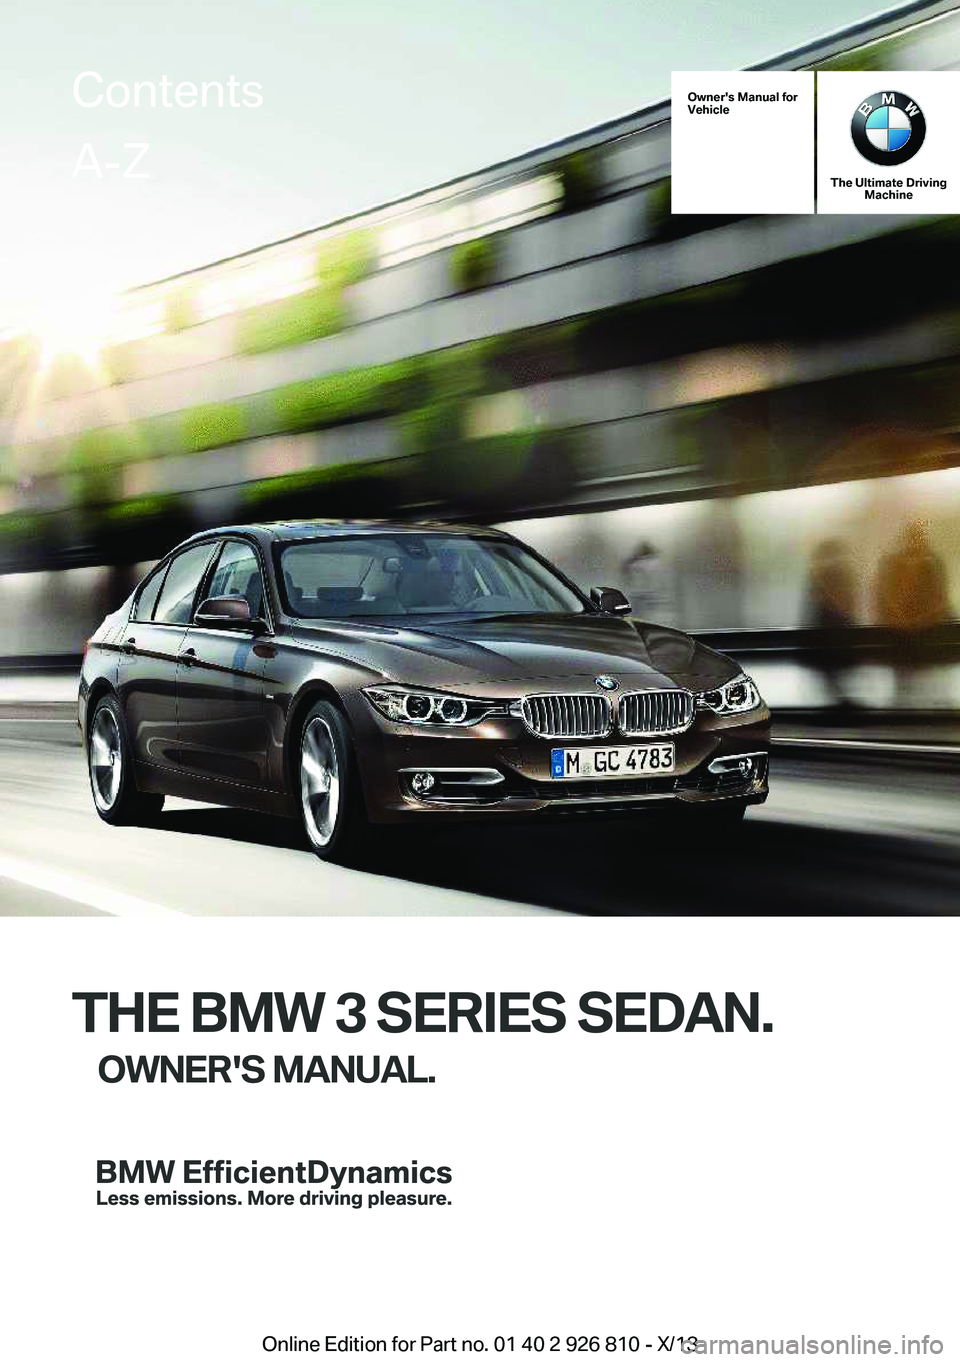 BMW 328I SEDAN 2013  Owners Manual Owner's Manual for
Vehicle
The Ultimate Driving Machine
THE BMW 3 SERIES SEDAN.
OWNER'S MANUAL.
ContentsA-Z
Online Edition for Part no. 01 40 2 926 810 - X/13   